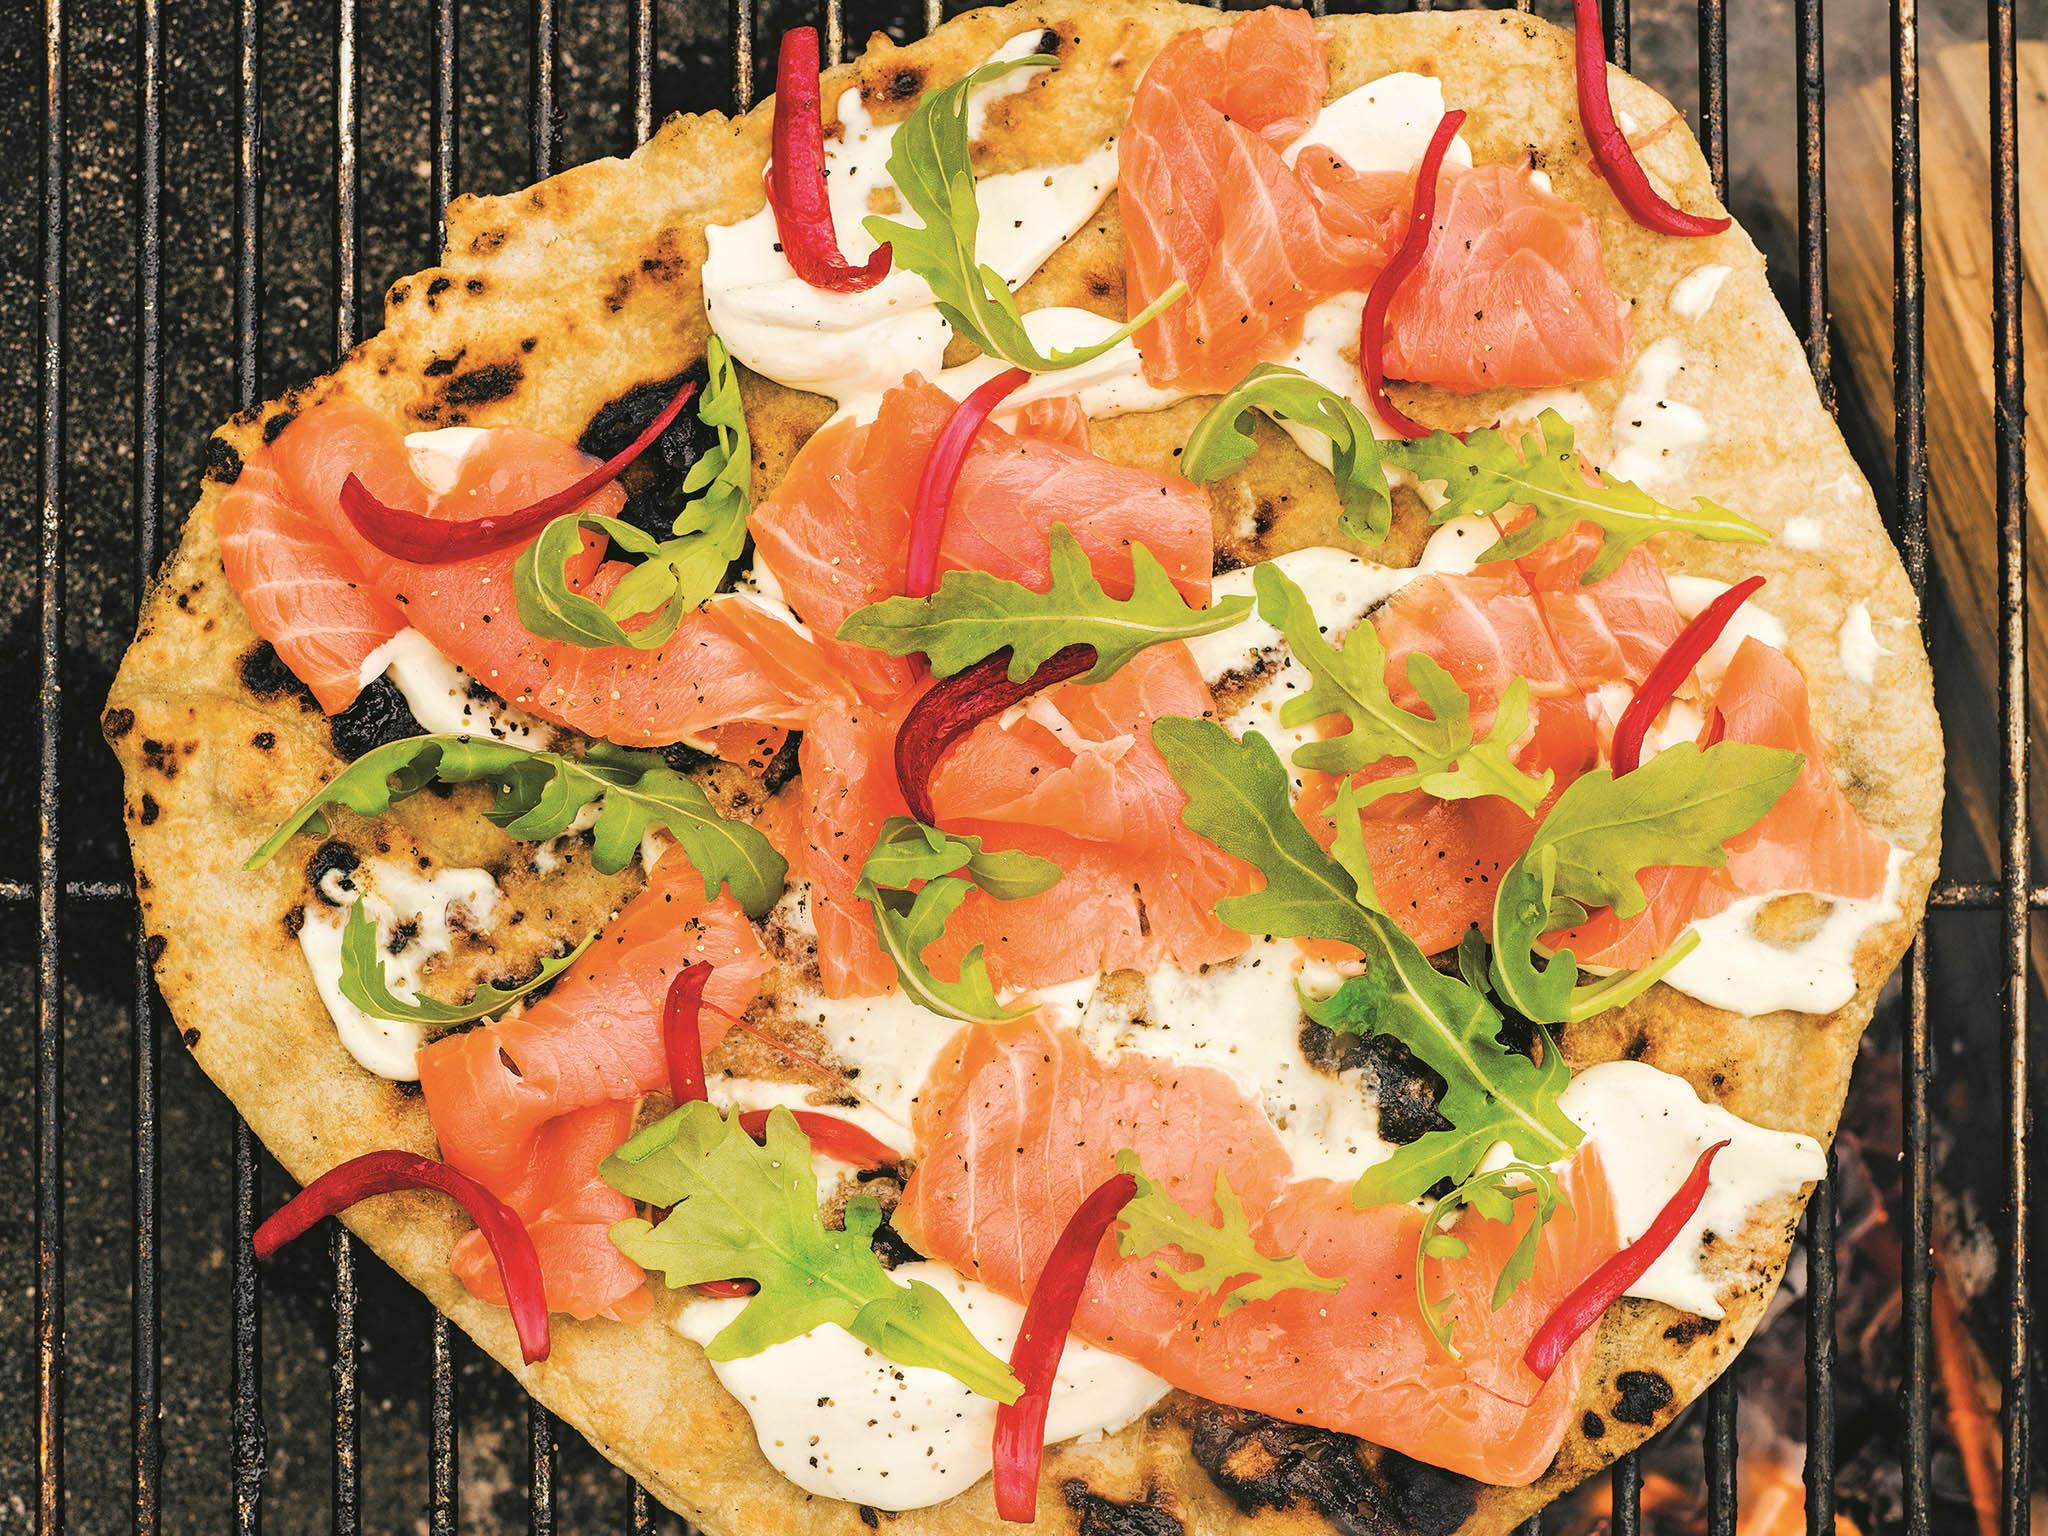 The Swedish Pizza: with smoked salmon, onions, homemade sour cream and rocket